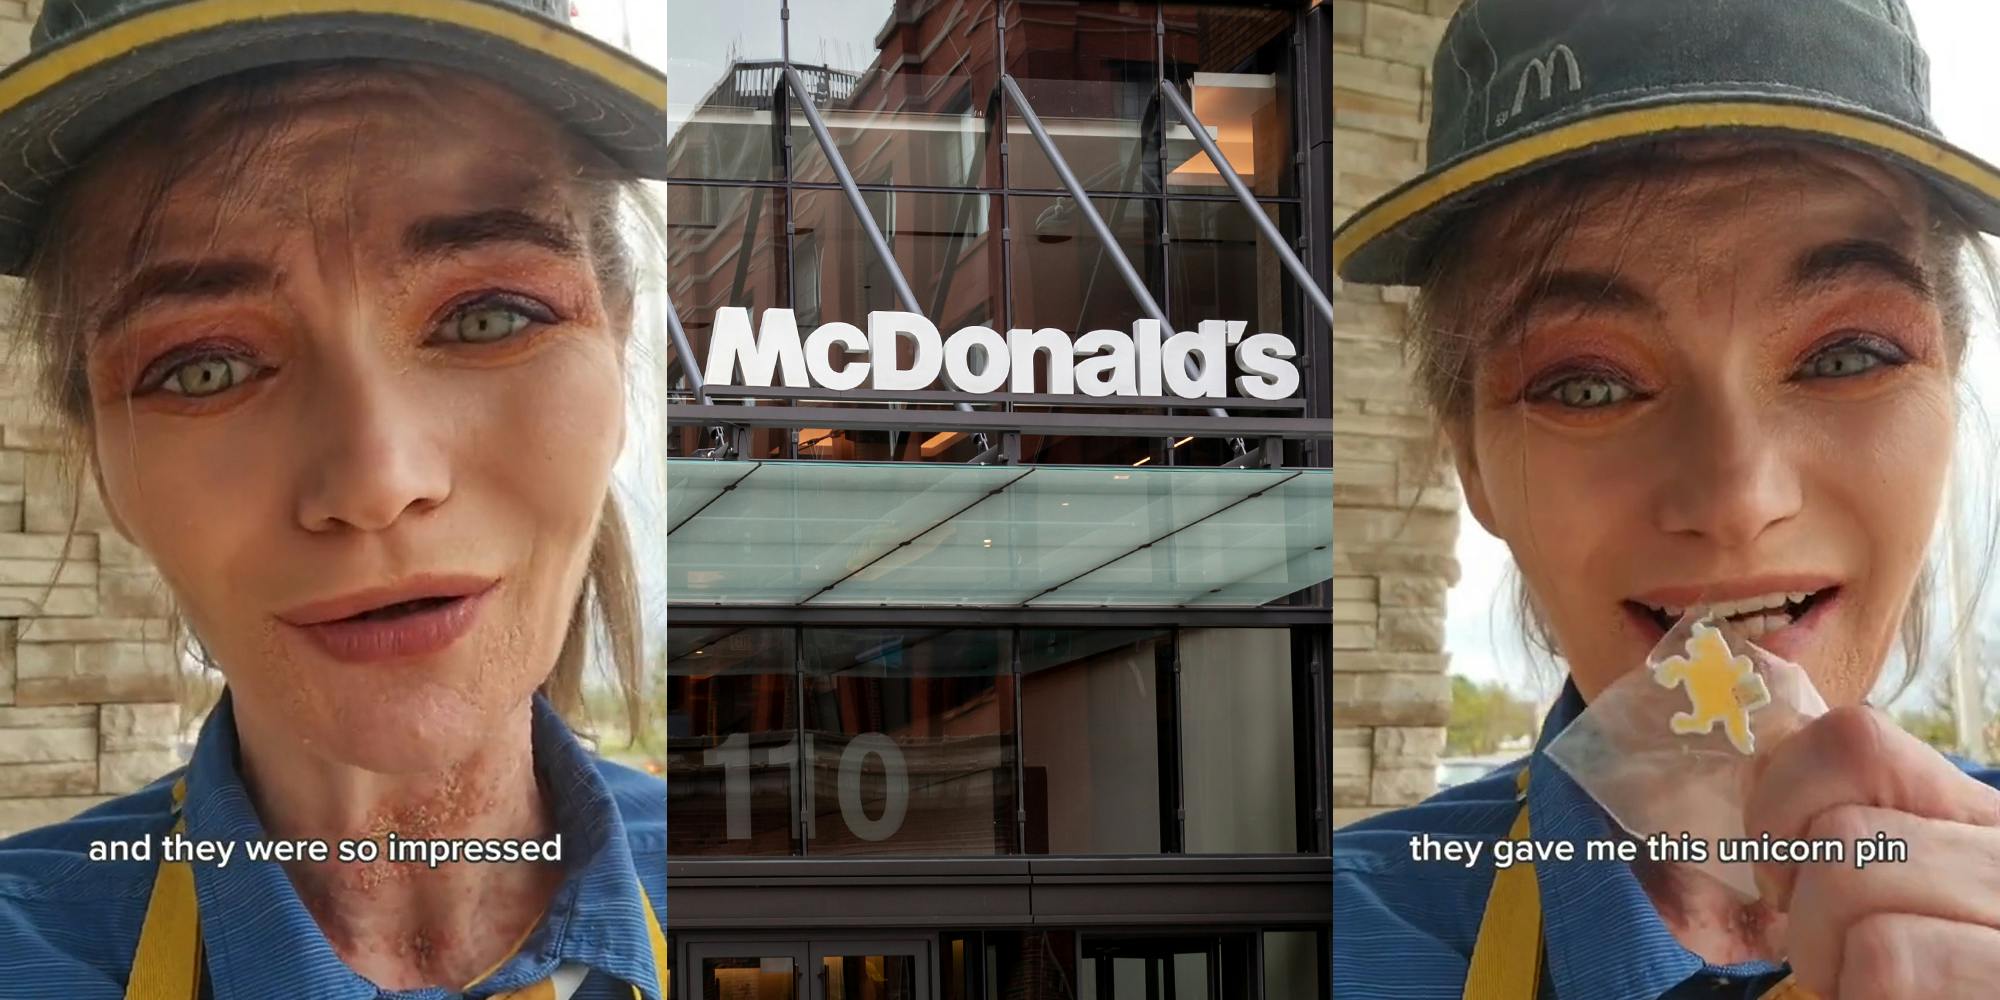 McDonald's employee speaking with caption "and they were so impressed" (l) McDonald's sign above corporate building entrance (c) McDonald's employee holding unicorn pin speaking with caption "they gave me this unicorn pin" (r)